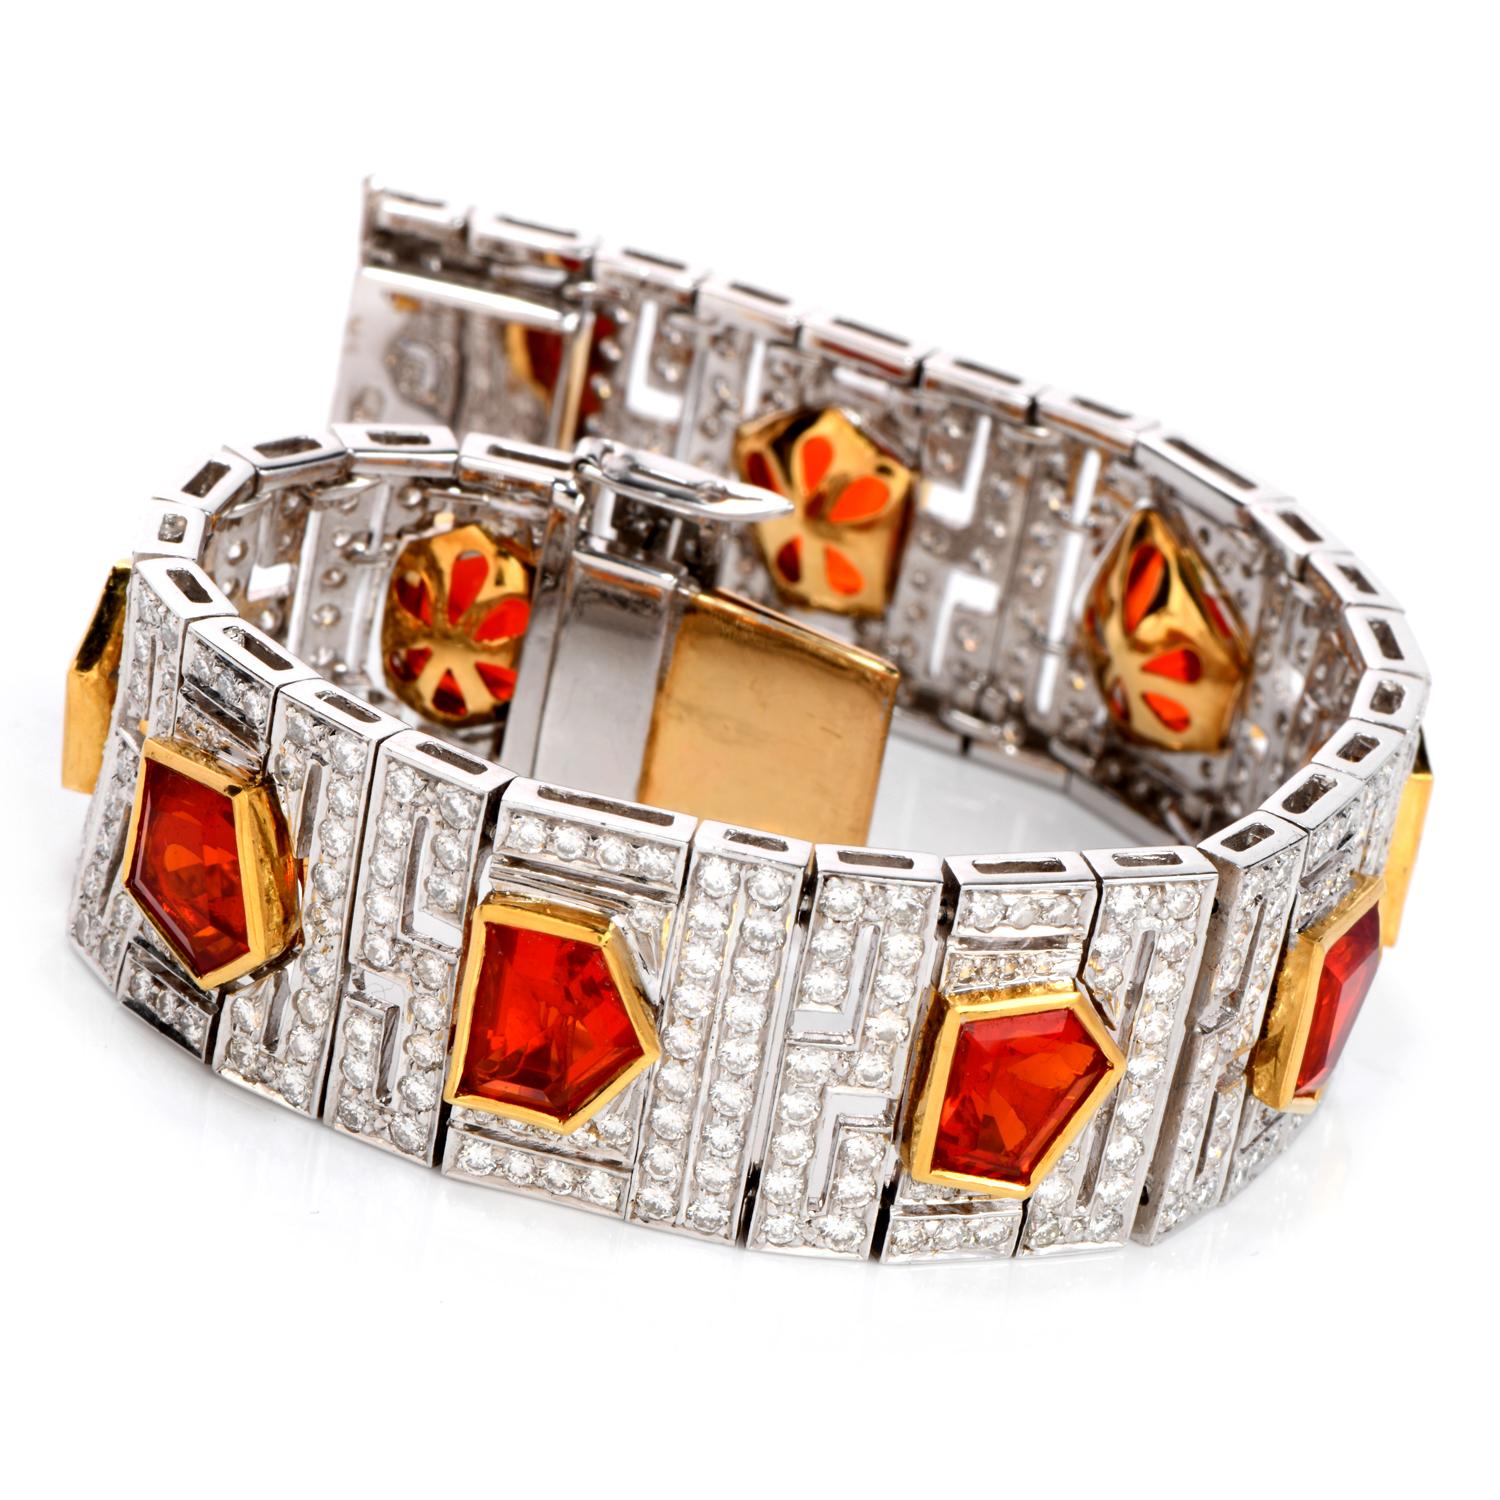 Shine vividly with this stunning vintage Art Deco Design Diamond Fire Opal 18K Gold Deco Wide Bracelet! 

It is crafted in 18-karat white and yellow gold and is purity marked.  There are bright genuine diamonds, round cut, and pave set, that create